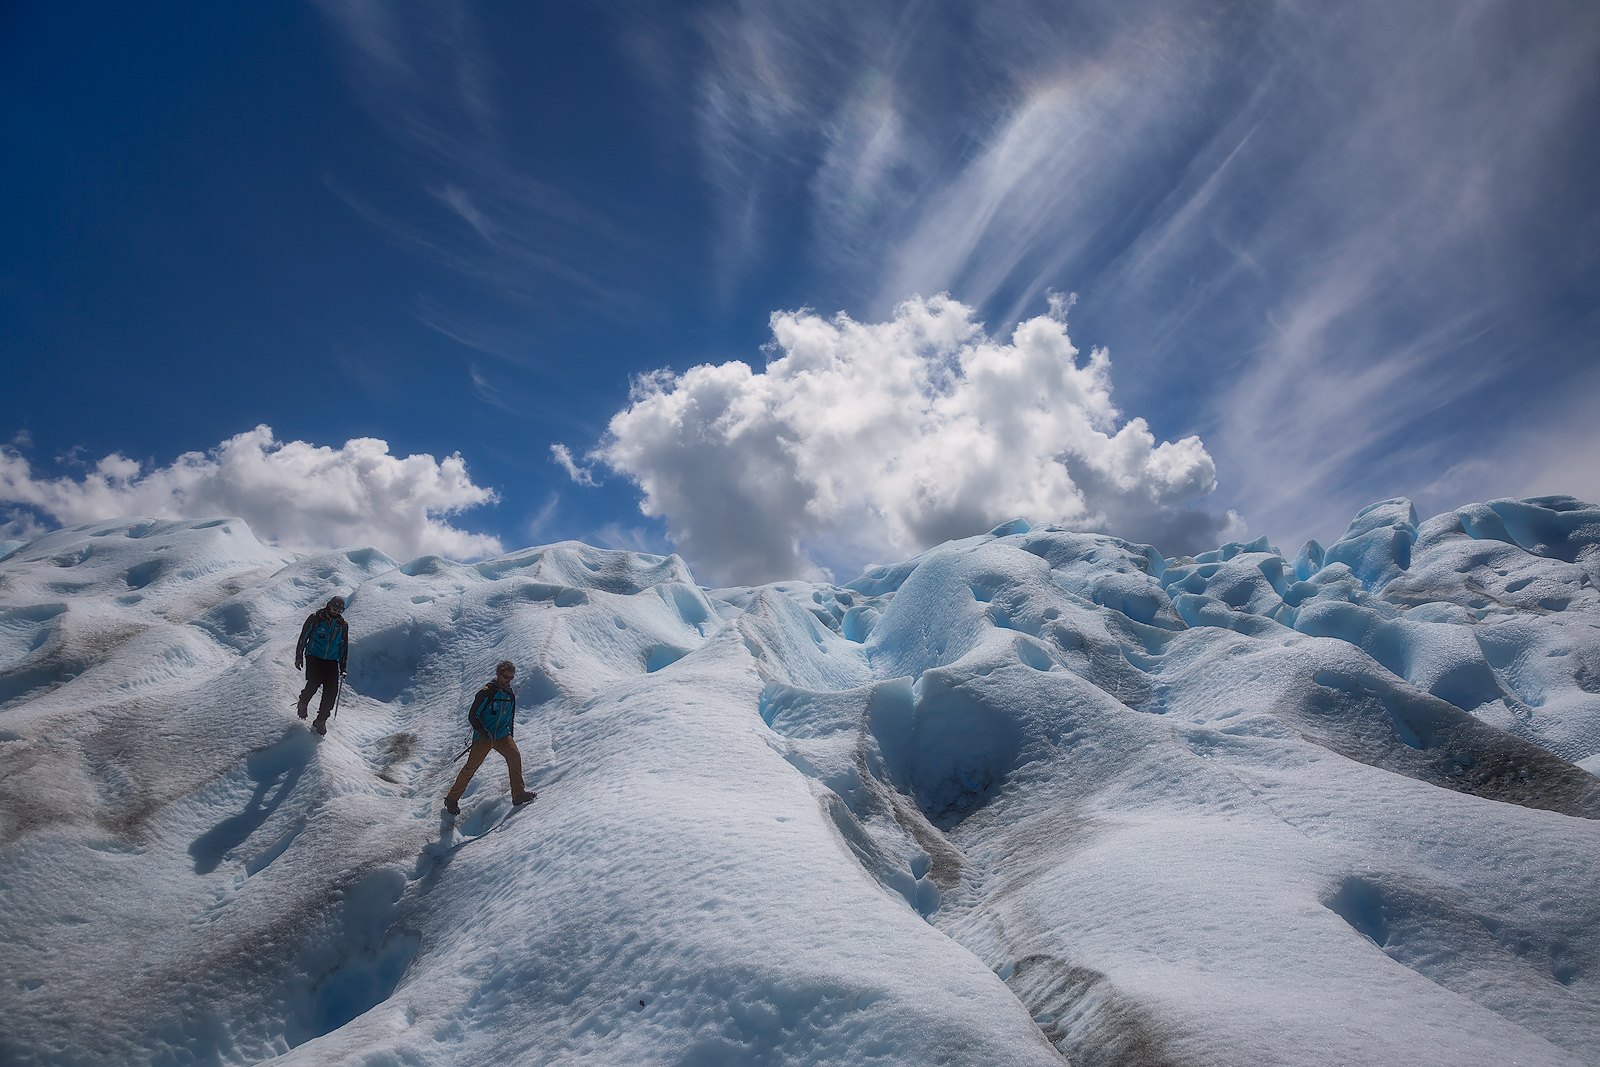 Unusual clouds forming behind two hikers on the Perito Moreno glacier.